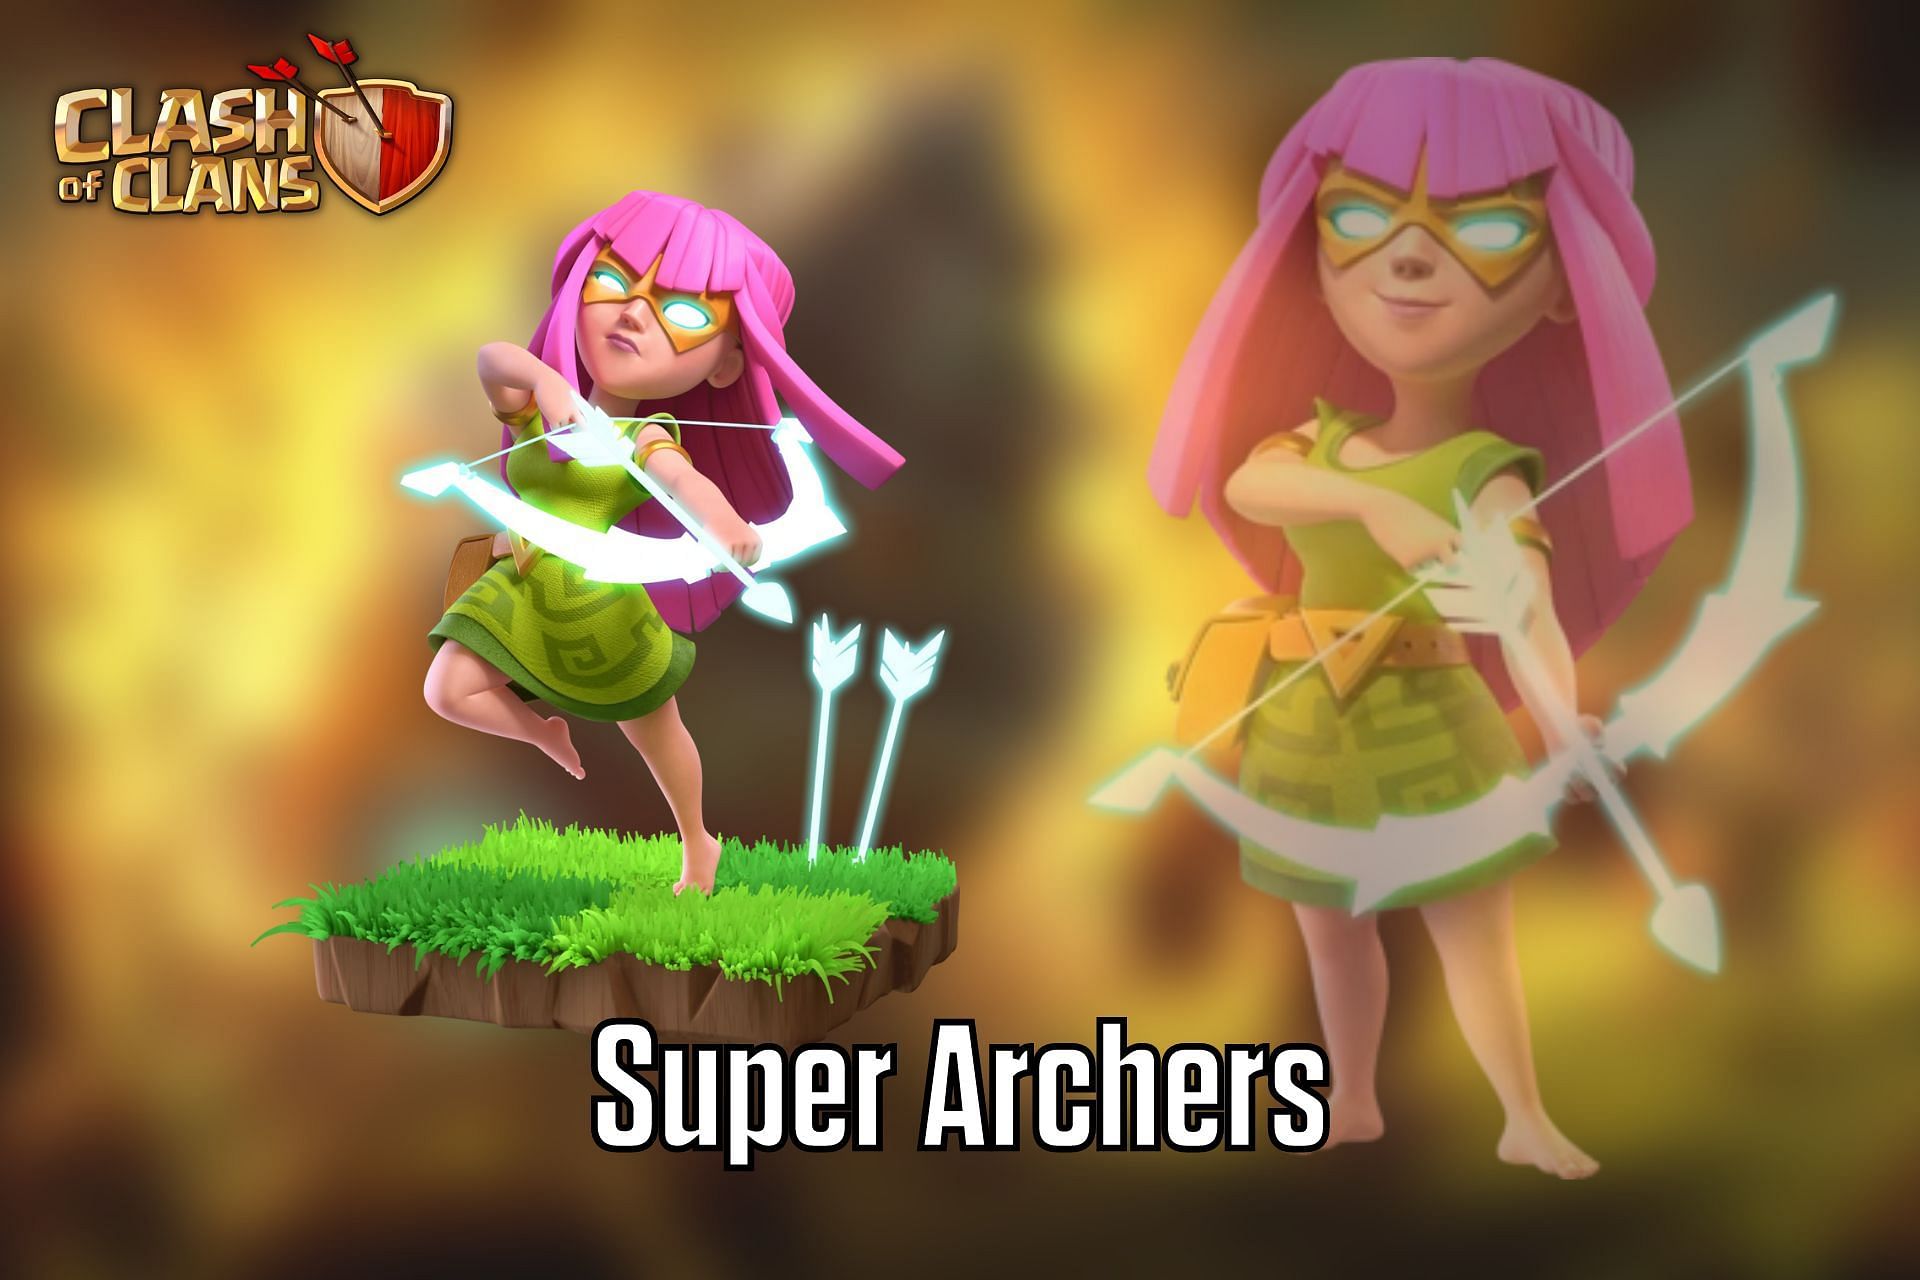 How to unlock Super Archers in Clash of Clans? 